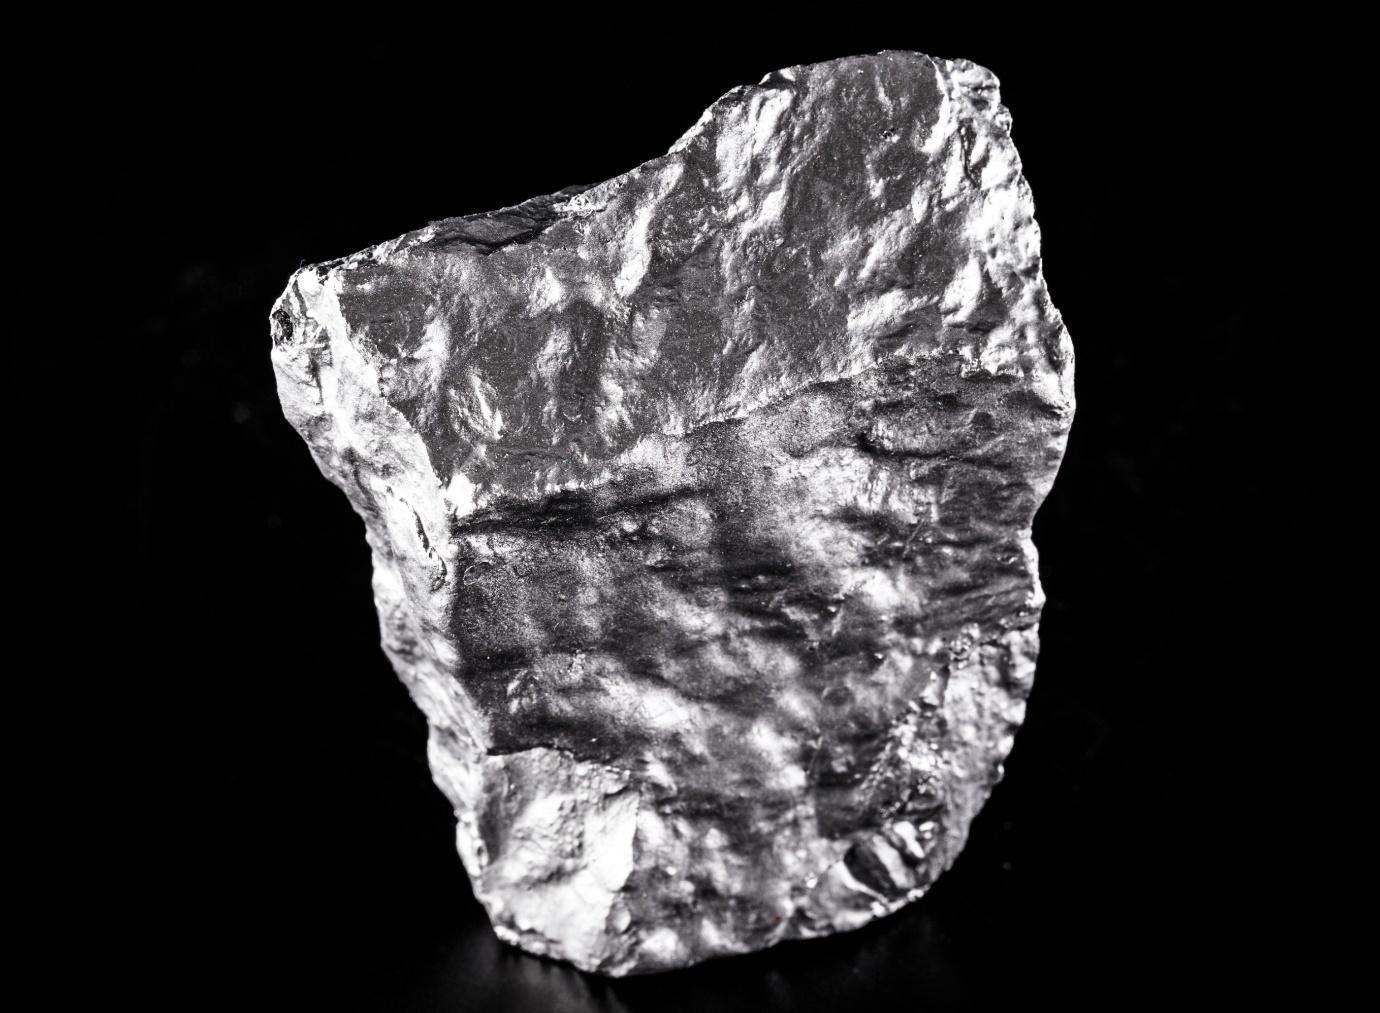 Silvery rock against a black background